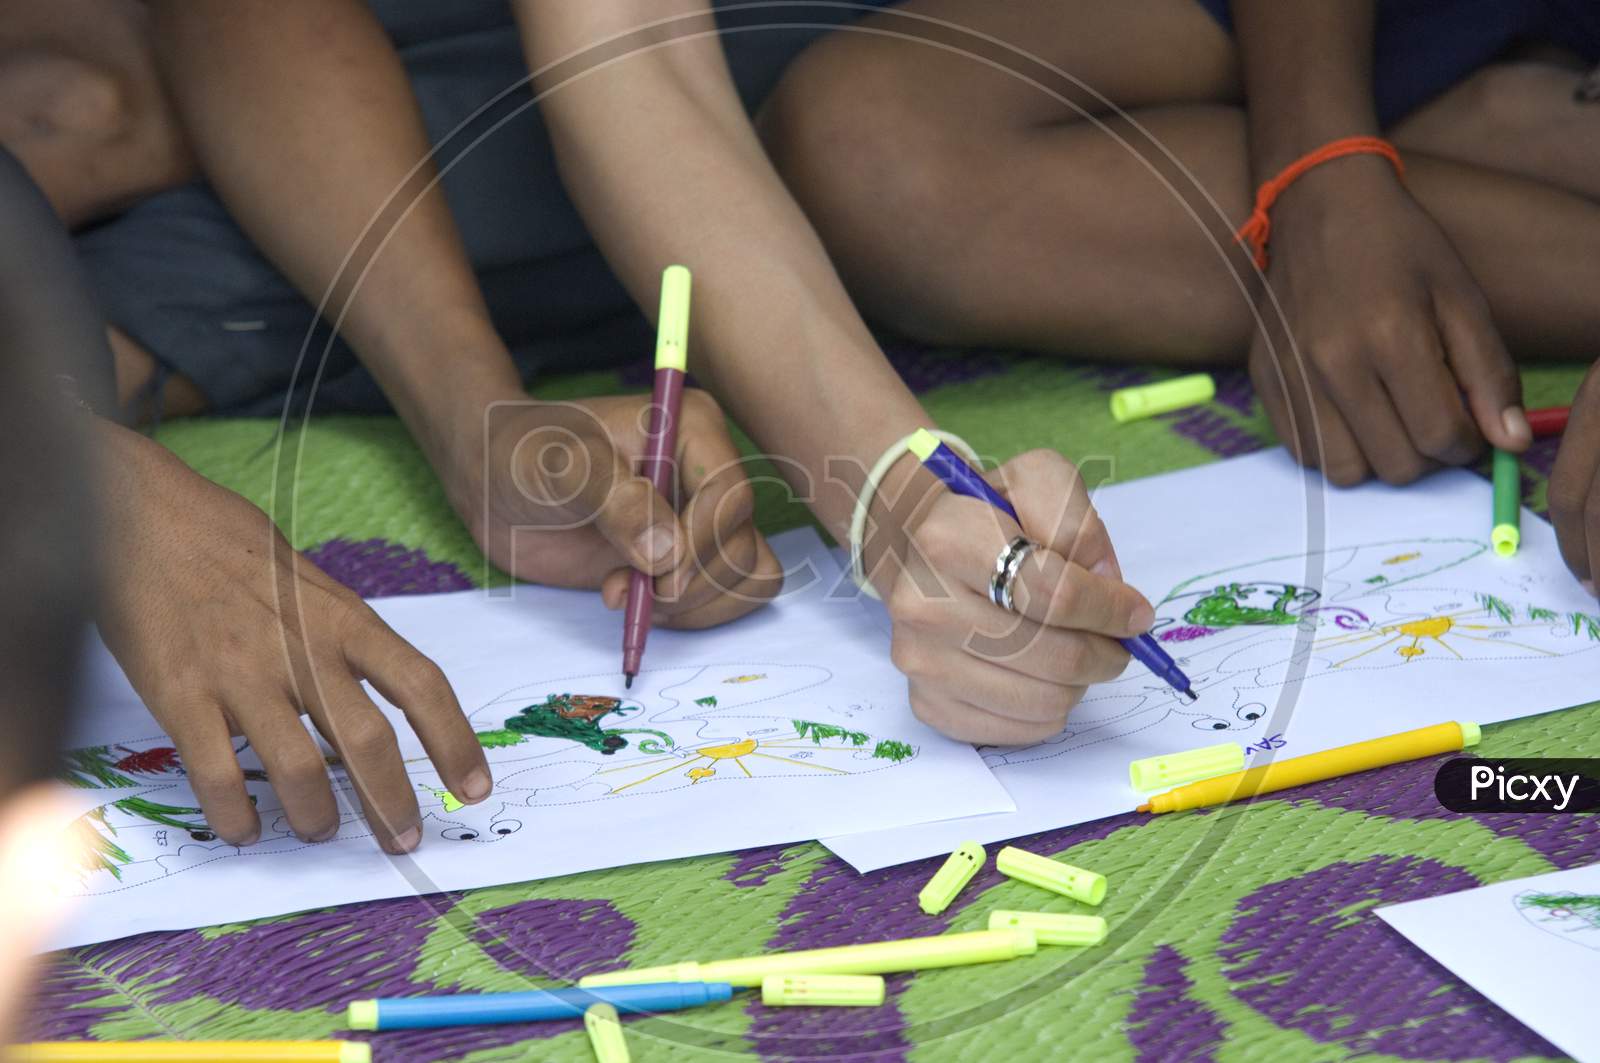 Students sketching along with the teacher